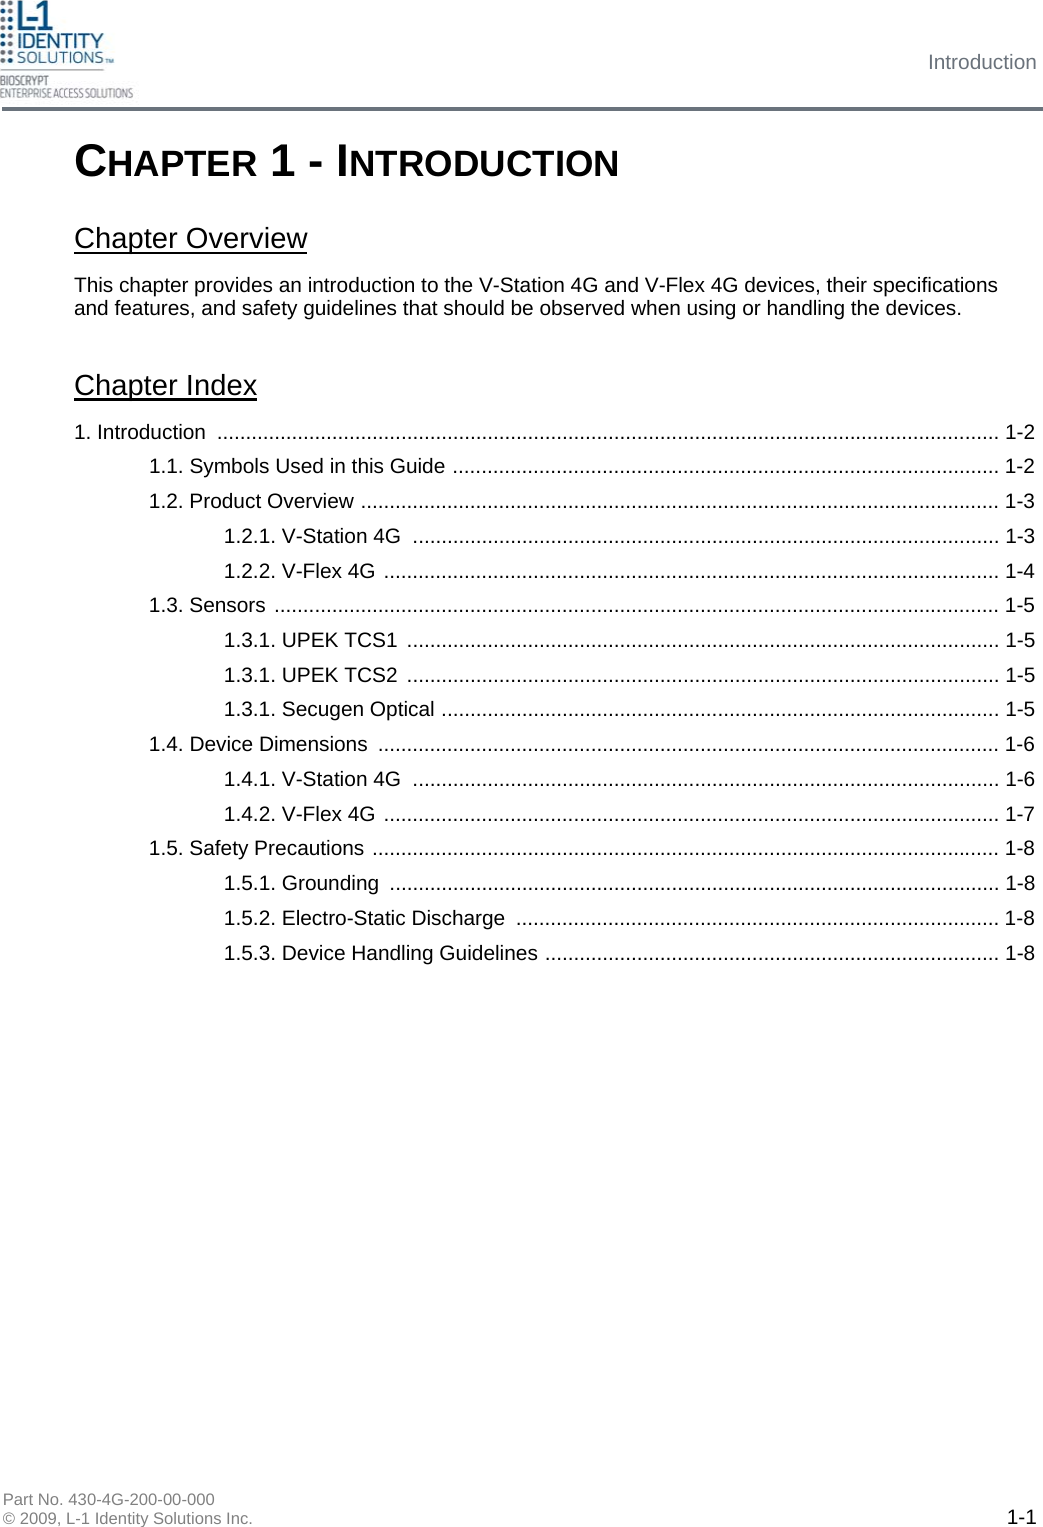 Introduction Part No. 430-4G-200-00-000 © 2009, L-1 Identity Solutions Inc.  1-1 This chapter provides an introduction to the V-Station 4G and V-Flex 4G devices, their specifications and features, and safety guidelines that should be observed when using or handling the devices. Chapter Index 1. Introduction ........................................................................................................................................ 1-2 1.1. Symbols Used in this Guide ............................................................................................... 1-2 1.2. Product Overview ............................................................................................................... 1-3 1.2.1. V-Station 4G  ...................................................................................................... 1-3 1.2.2. V-Flex 4G ........................................................................................................... 1-4 1.3. Sensors .............................................................................................................................. 1-5 1.3.1. UPEK TCS1  ....................................................................................................... 1-5 1.3.1. UPEK TCS2  ....................................................................................................... 1-5 1.3.1. Secugen Optical ................................................................................................. 1-5 1.4. Device Dimensions ............................................................................................................ 1-6 1.4.1. V-Station 4G  ...................................................................................................... 1-6 1.4.2. V-Flex 4G ........................................................................................................... 1-7 1.5. Safety Precautions ............................................................................................................. 1-8 1.5.1. Grounding  .......................................................................................................... 1-8 1.5.2. Electro-Static Discharge .................................................................................... 1-8 1.5.3. Device Handling Guidelines ............................................................................... 1-8 CHAPTER 1 - INTRODUCTION Chapter Overview 